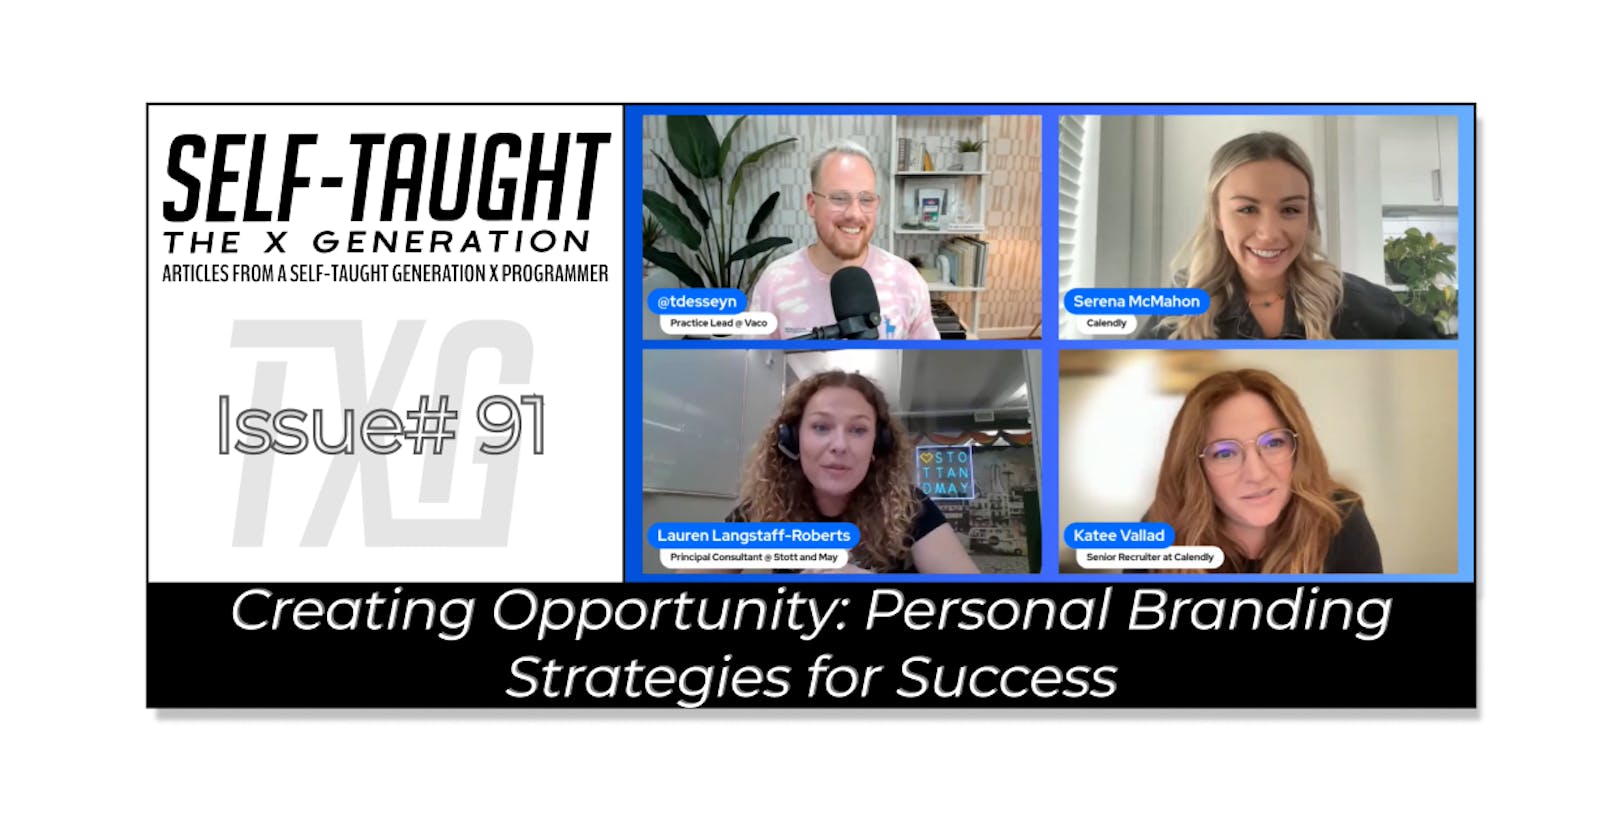 Creating Opportunity: Personal Branding Strategies for Success